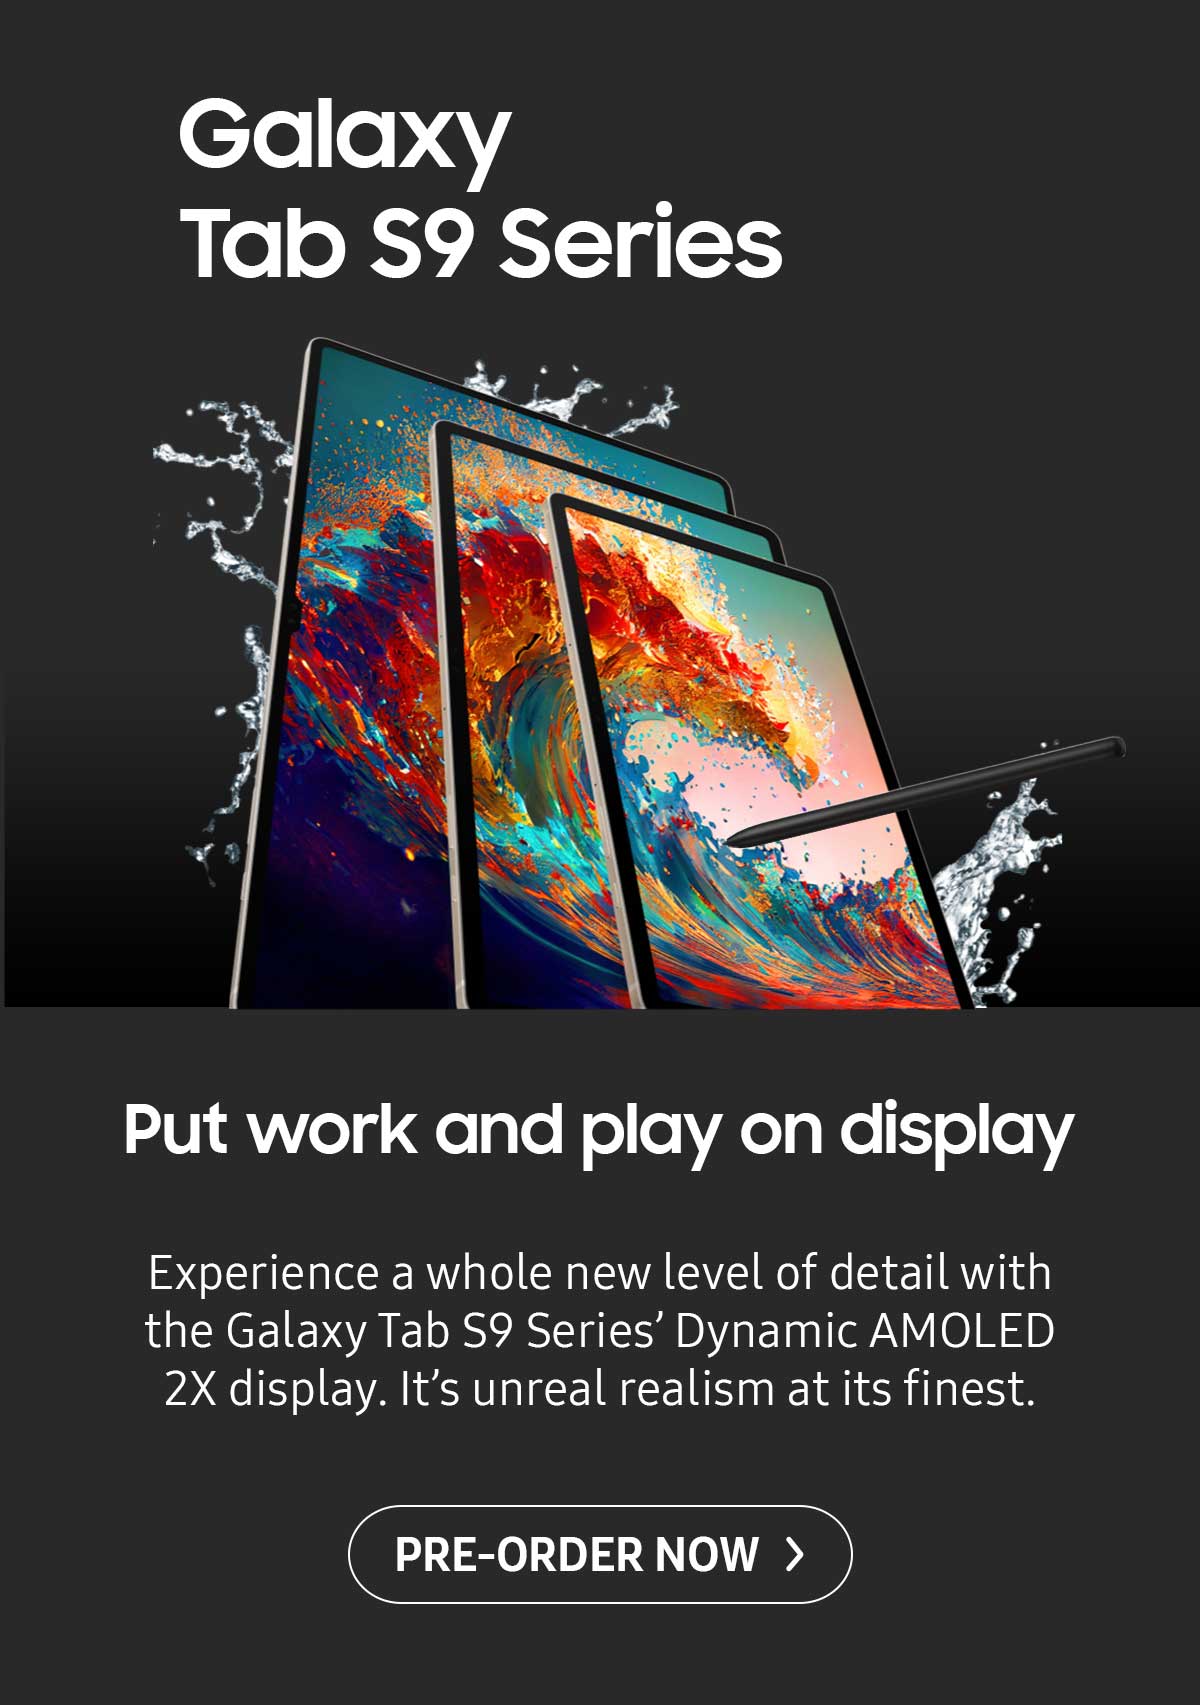 Galaxy Tab S9 Series. Put work and play on display. Experience a whole new level of detail with the Galaxy Tab S9 Series' Dvnamic AMOLED 2X display. It's unreal realism at its finest. Pre-order now!